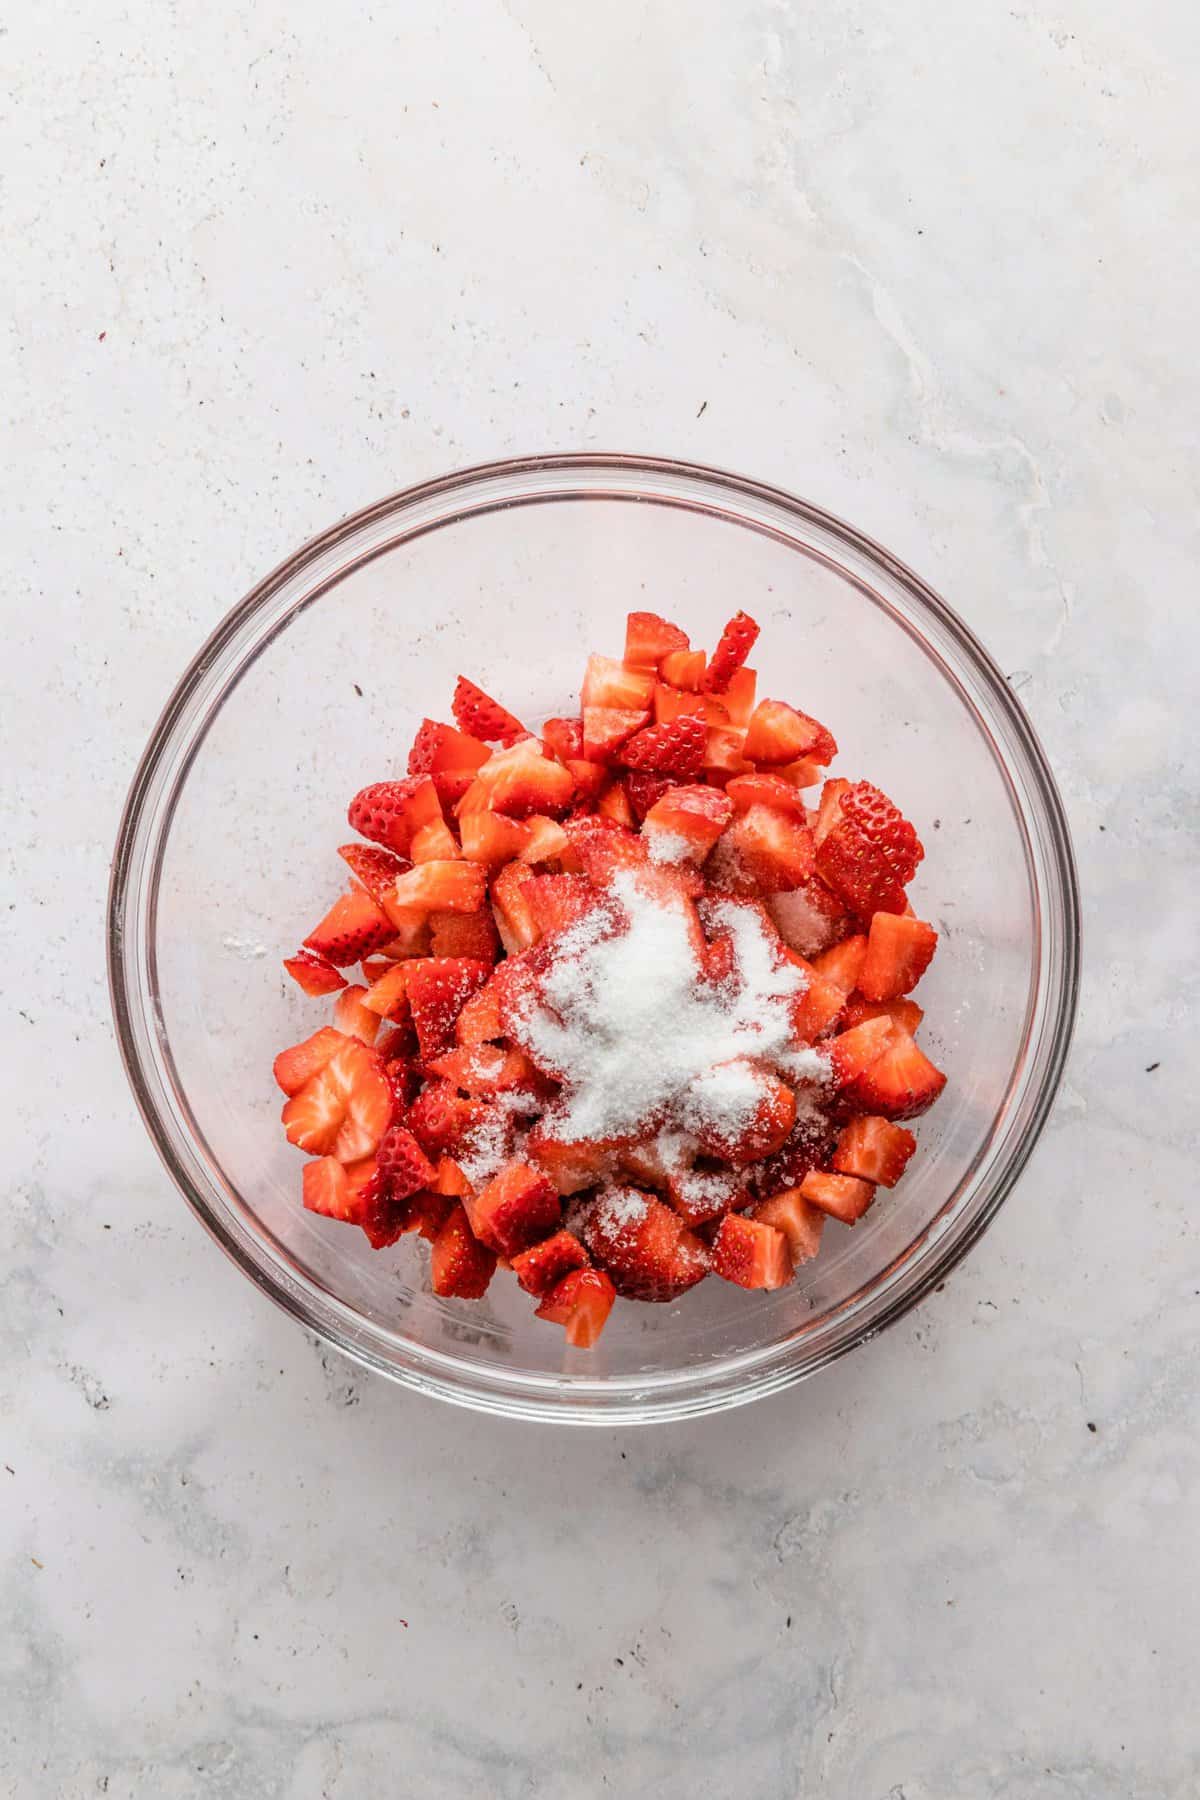 Large glass bowl with diced strawberries and a bit of sugar sprinkled on top.